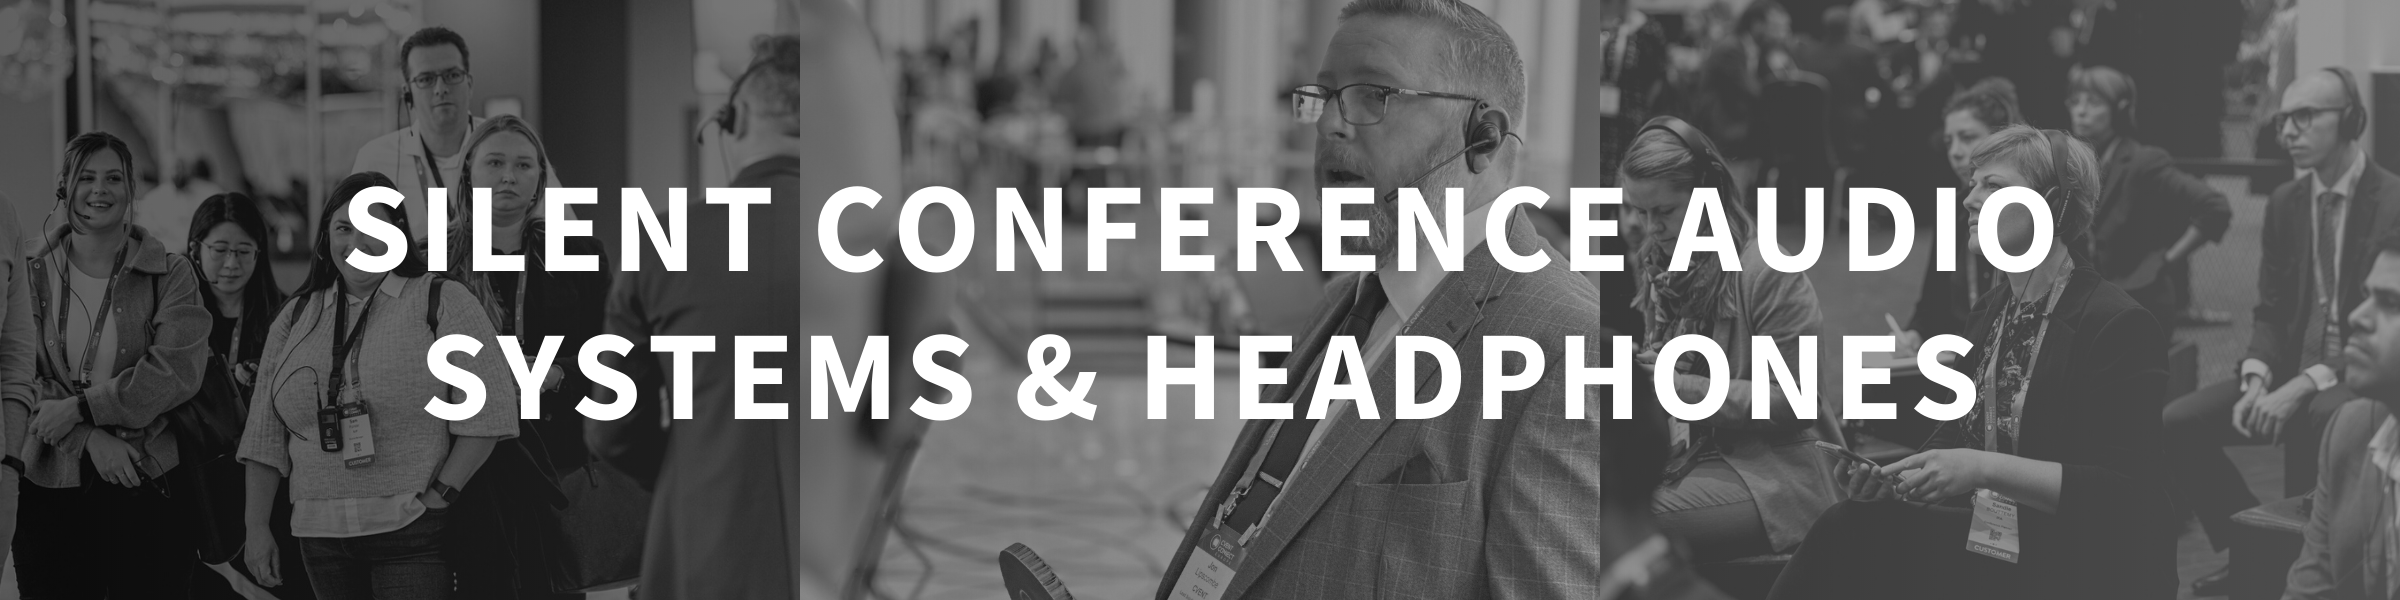 Silent Conference Audio Systems & Headphones